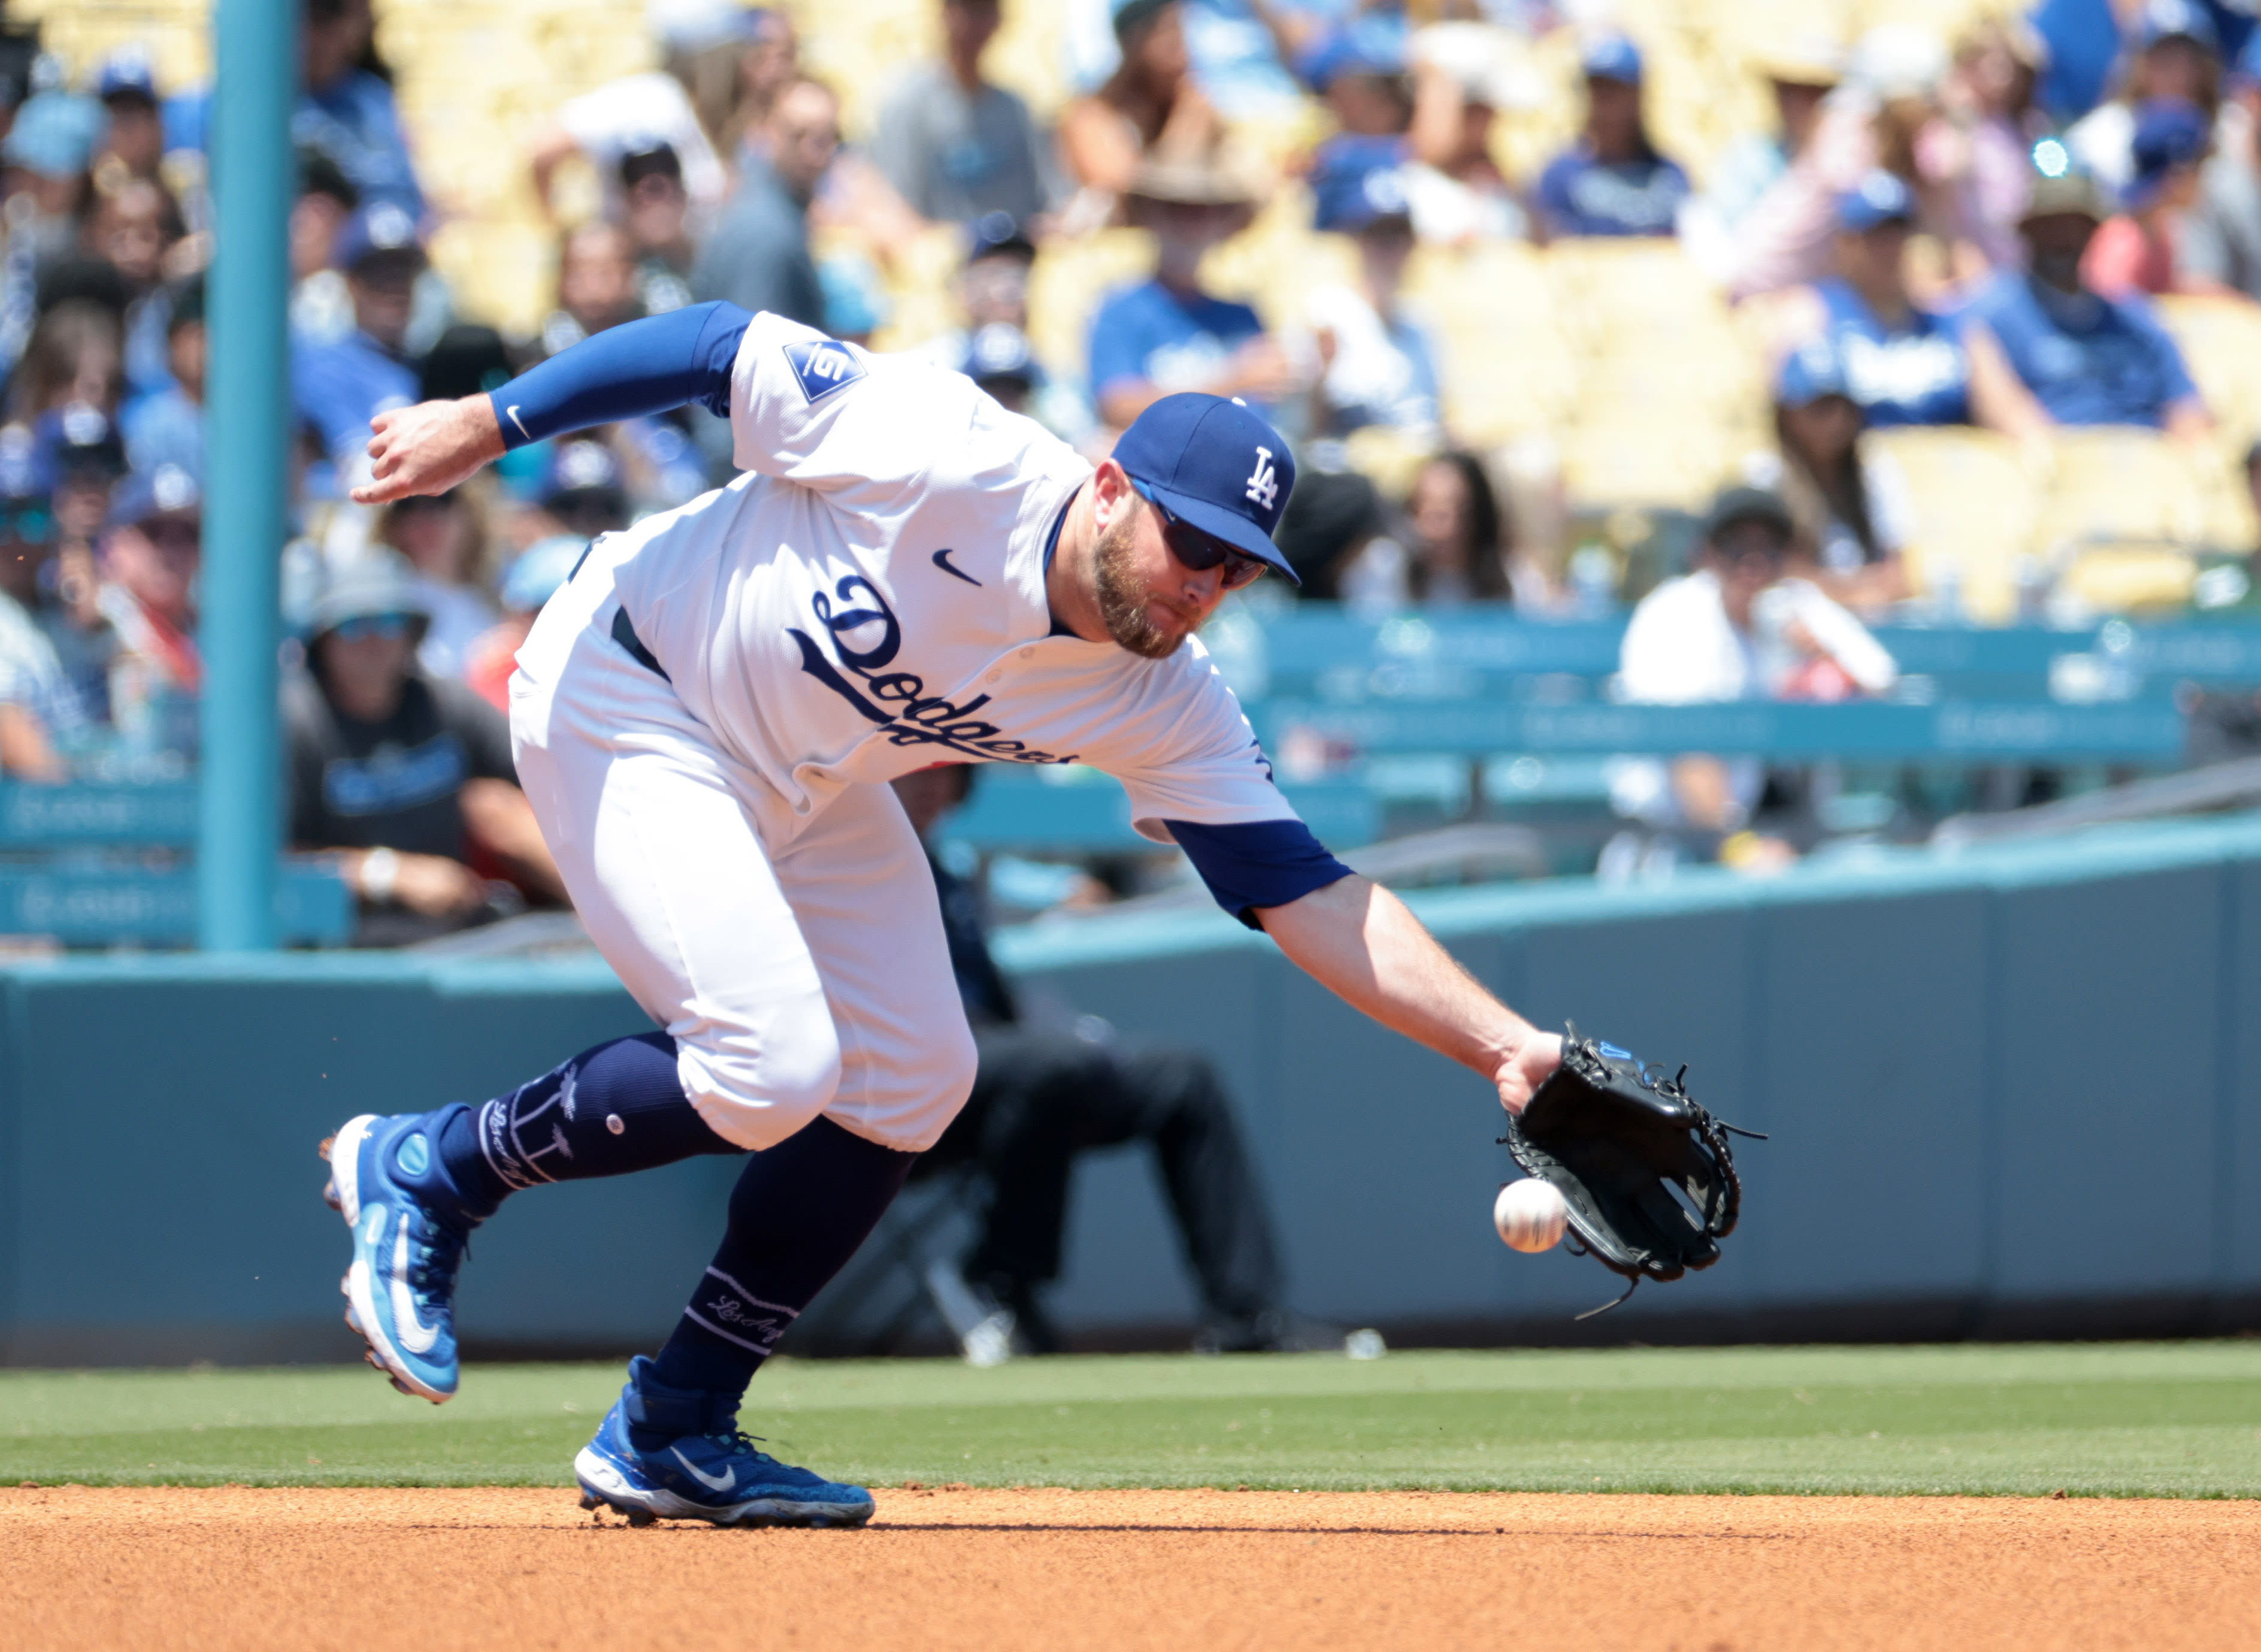 'He’s on a mission': How Max Muncy quelled concerns about his defense at third base